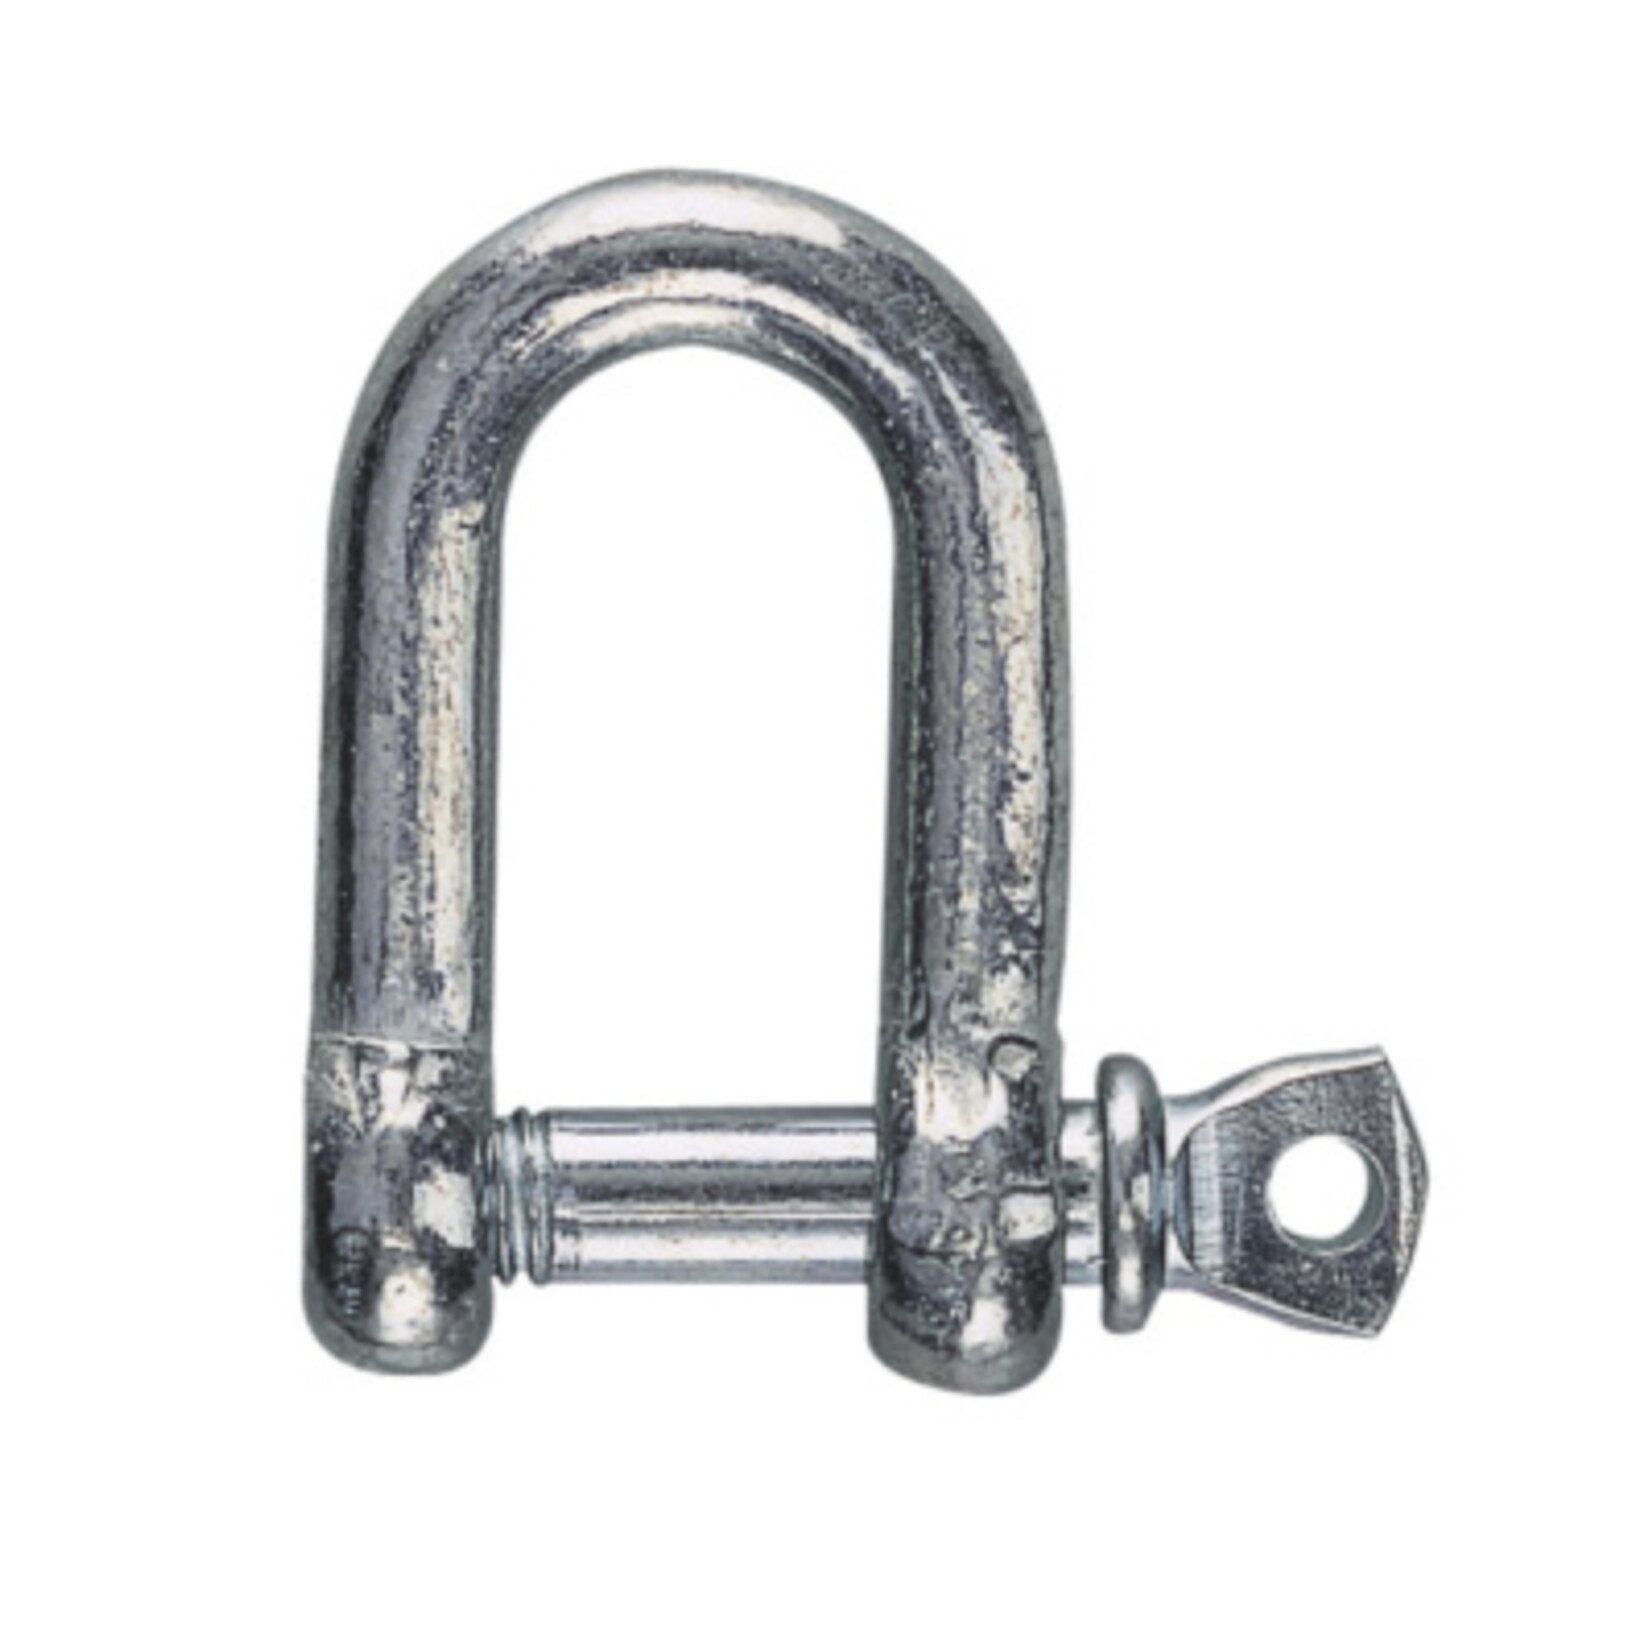 Plastimo Shackle gal d-shap dia 5mm yellow code (